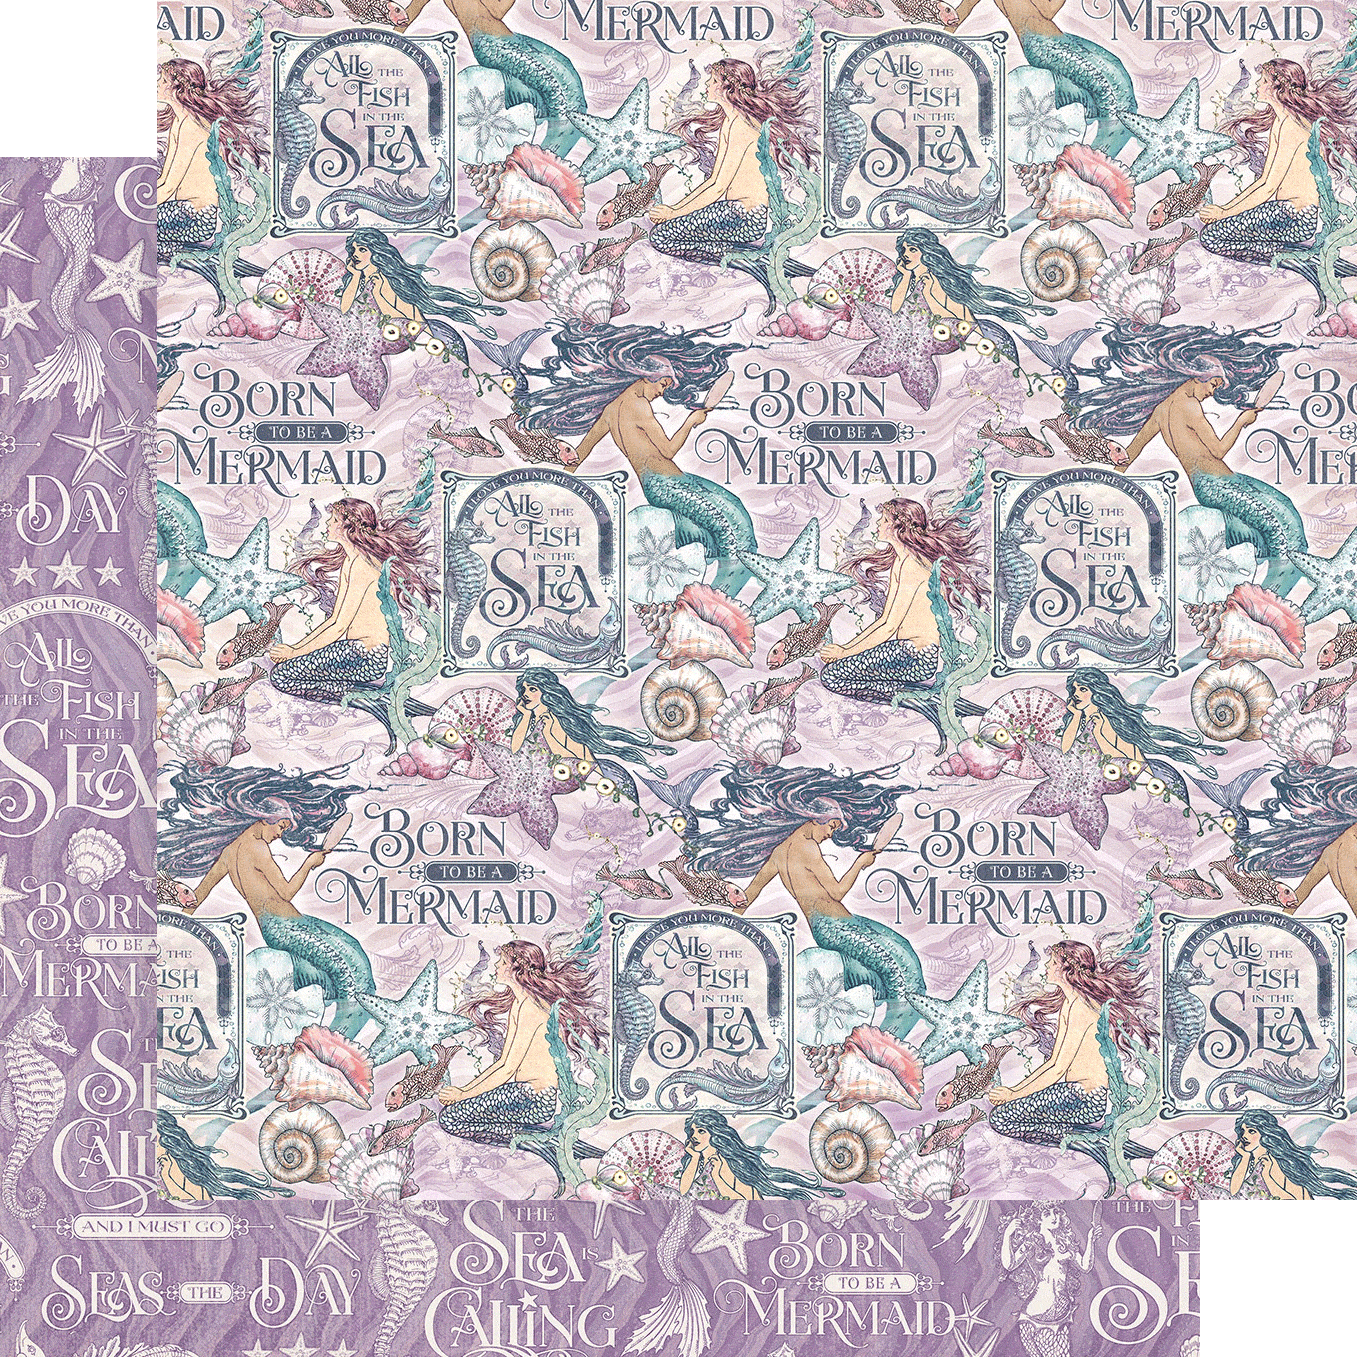 Make A Splash Collection Fantasy Cove 12 x 12 Double-Sided Scrapbook Paper by Graphic 45 - Scrapbook Supply Companies